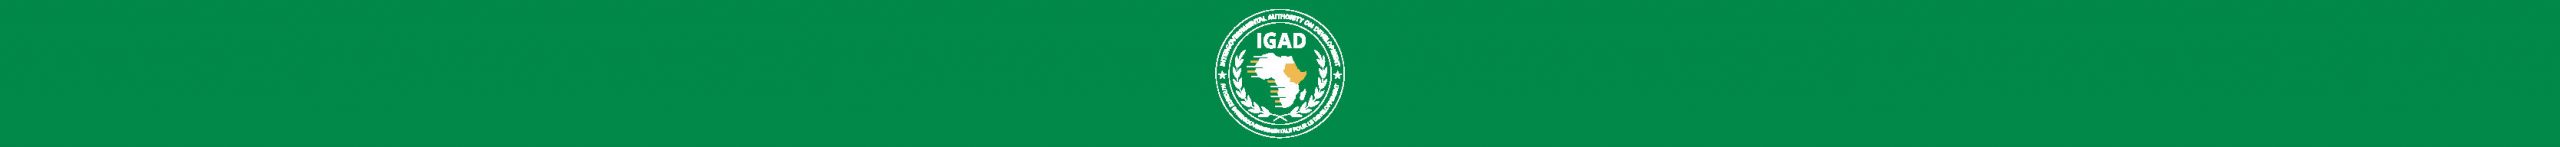 Strengthening Cooperation on Migration Management Among IGAD Countries